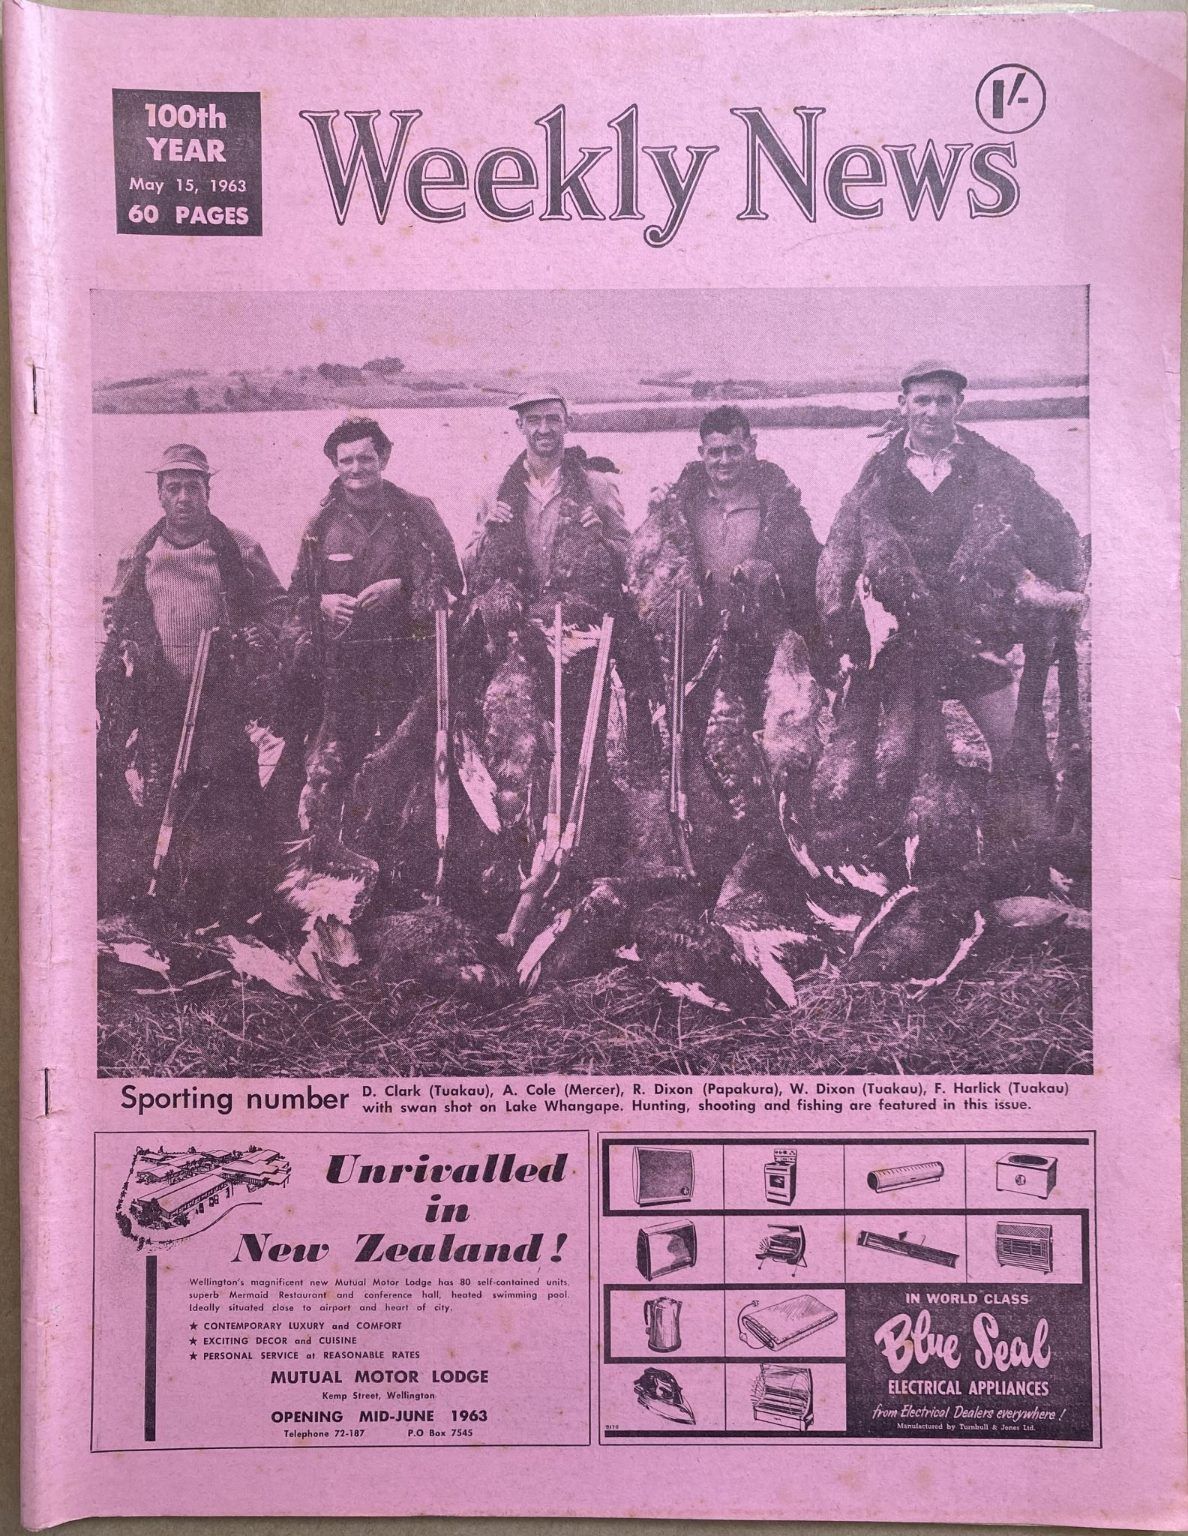 OLD NEWSPAPER: The Weekly News, No. 5190, 15 May 1963